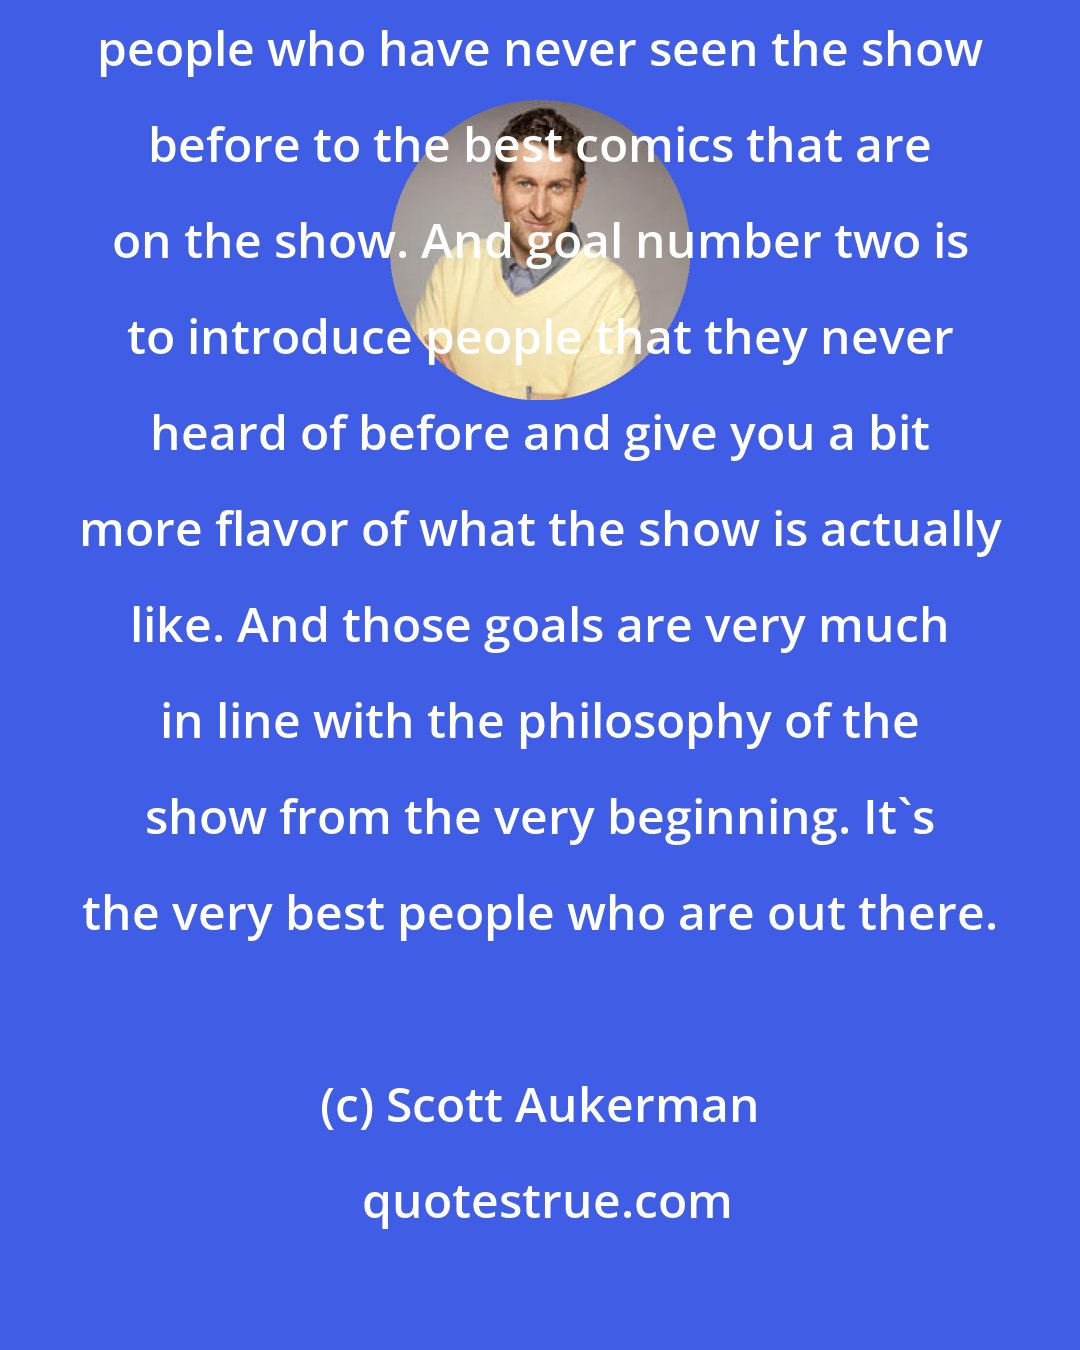 Scott Aukerman: I would say we had two goals when doing this CD. The first goal is to introduce people who have never seen the show before to the best comics that are on the show. And goal number two is to introduce people that they never heard of before and give you a bit more flavor of what the show is actually like. And those goals are very much in line with the philosophy of the show from the very beginning. It's the very best people who are out there.